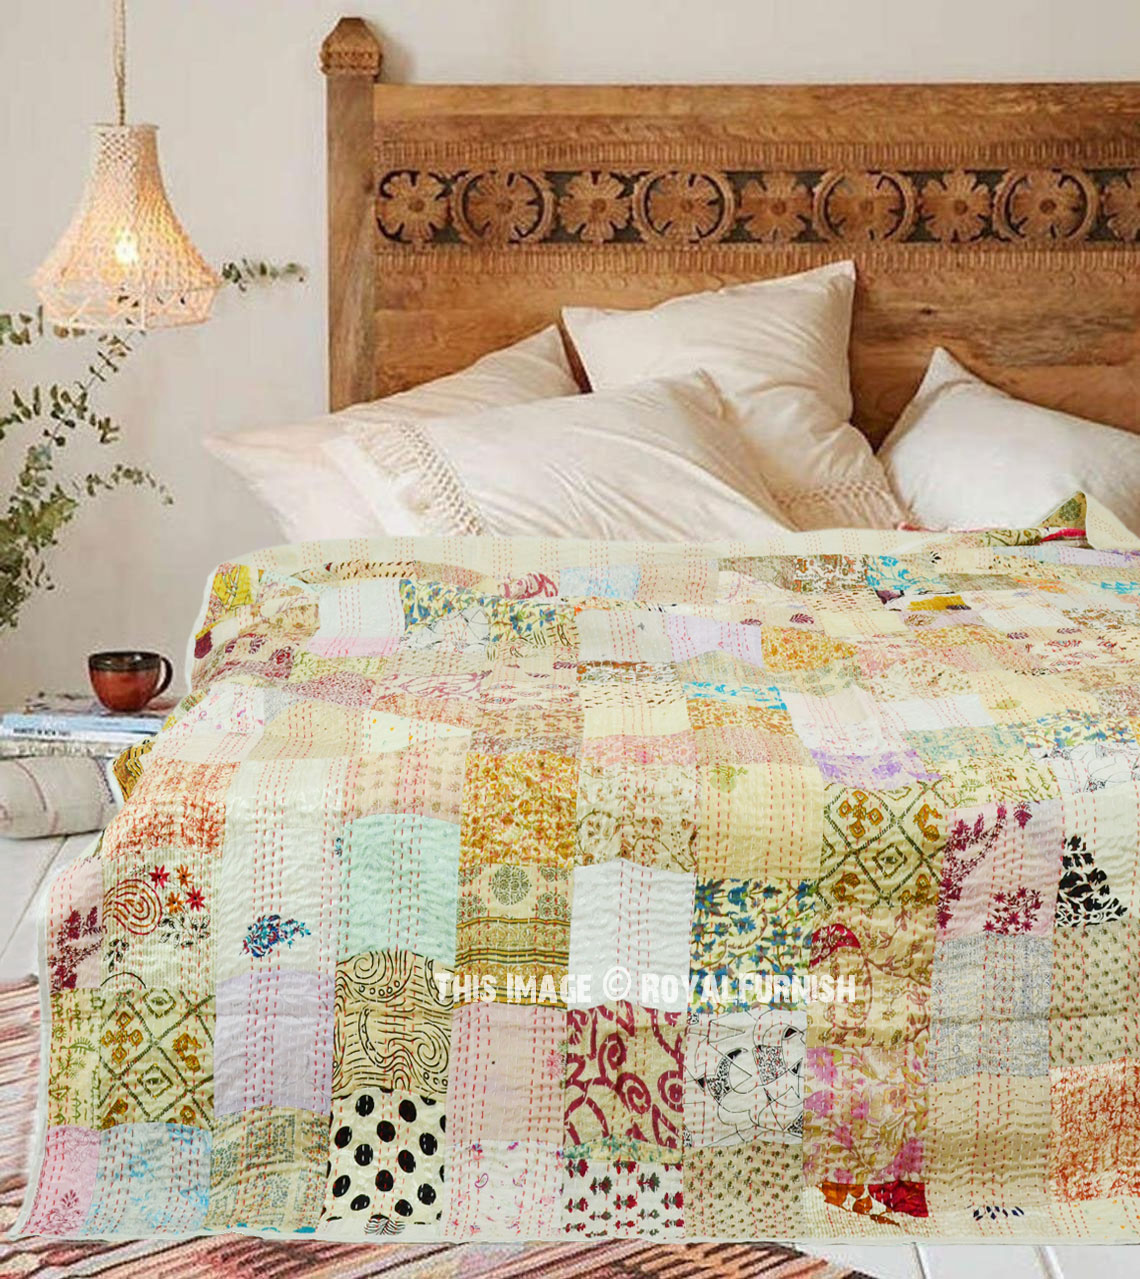 Details about   New Indian Pure Cotton-Kantha Work Bed Cover Queen Size Quilt Bedspreads-Blanket 